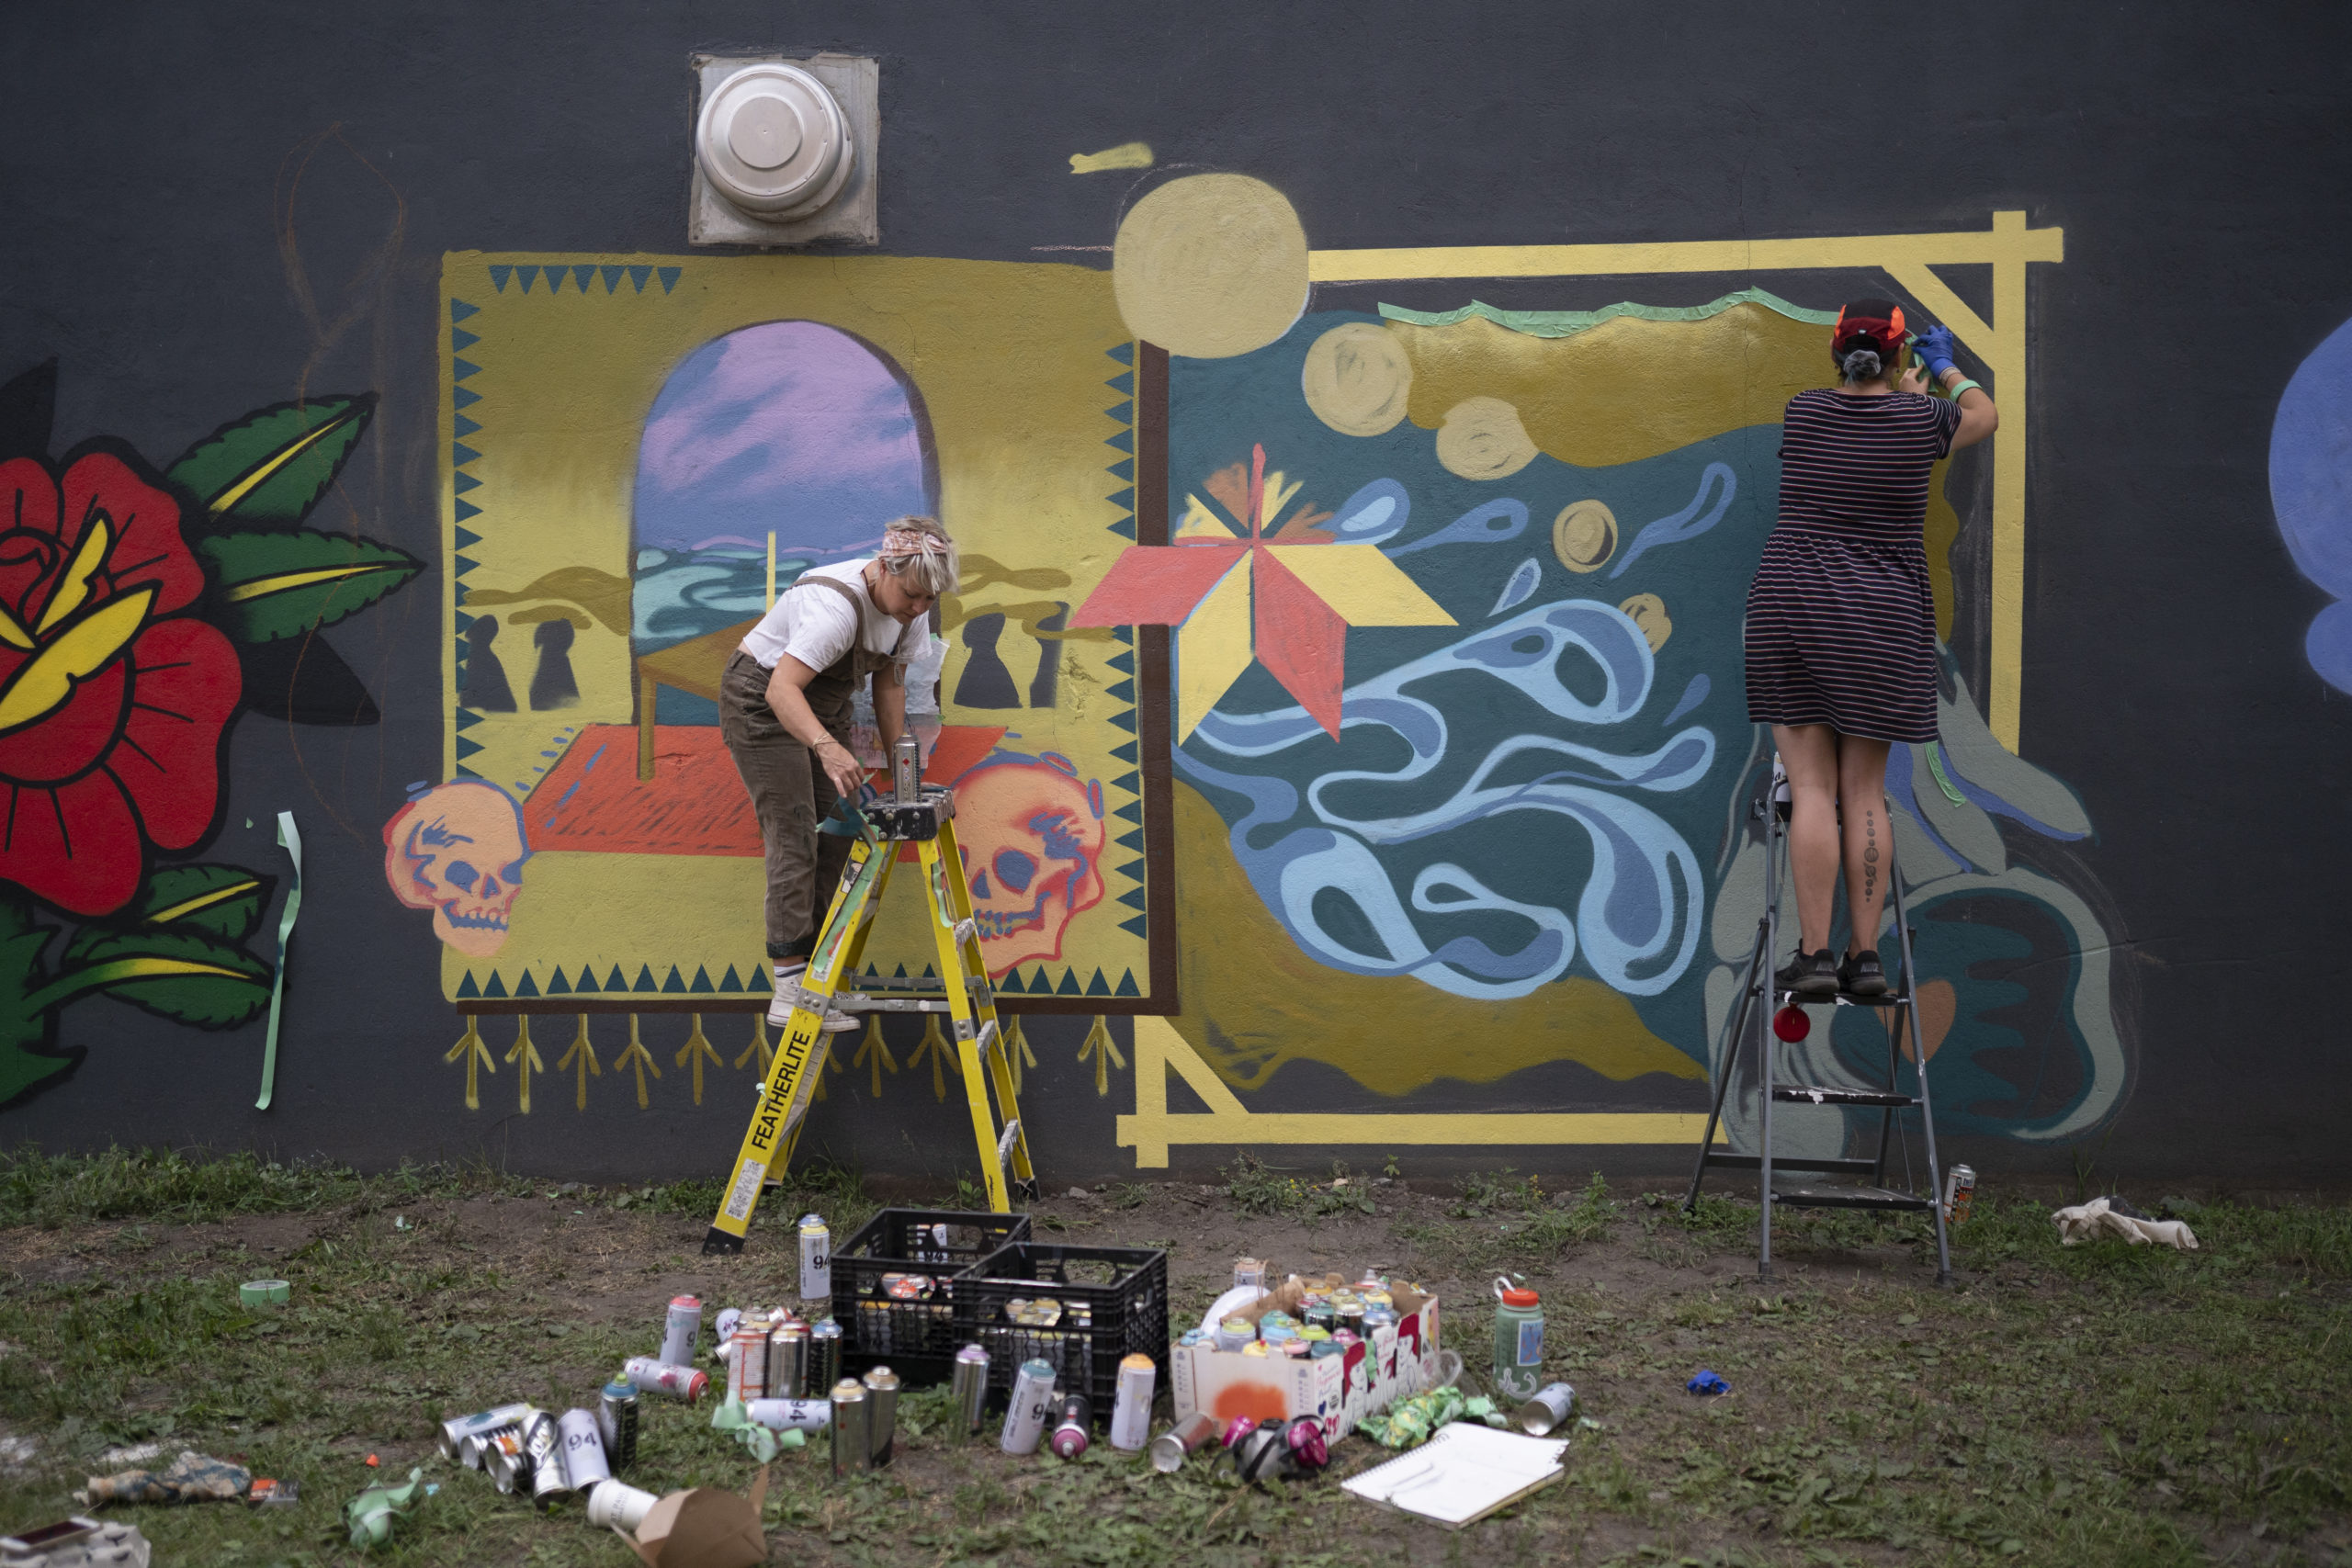 Photo of artist Shelby Gagnon and her mentor Lora Northway painting their mural. Both are on step ladders, there are spray cans and supplies scattered around scene. The mural has colours of yellow ochre, purple, blue and red.